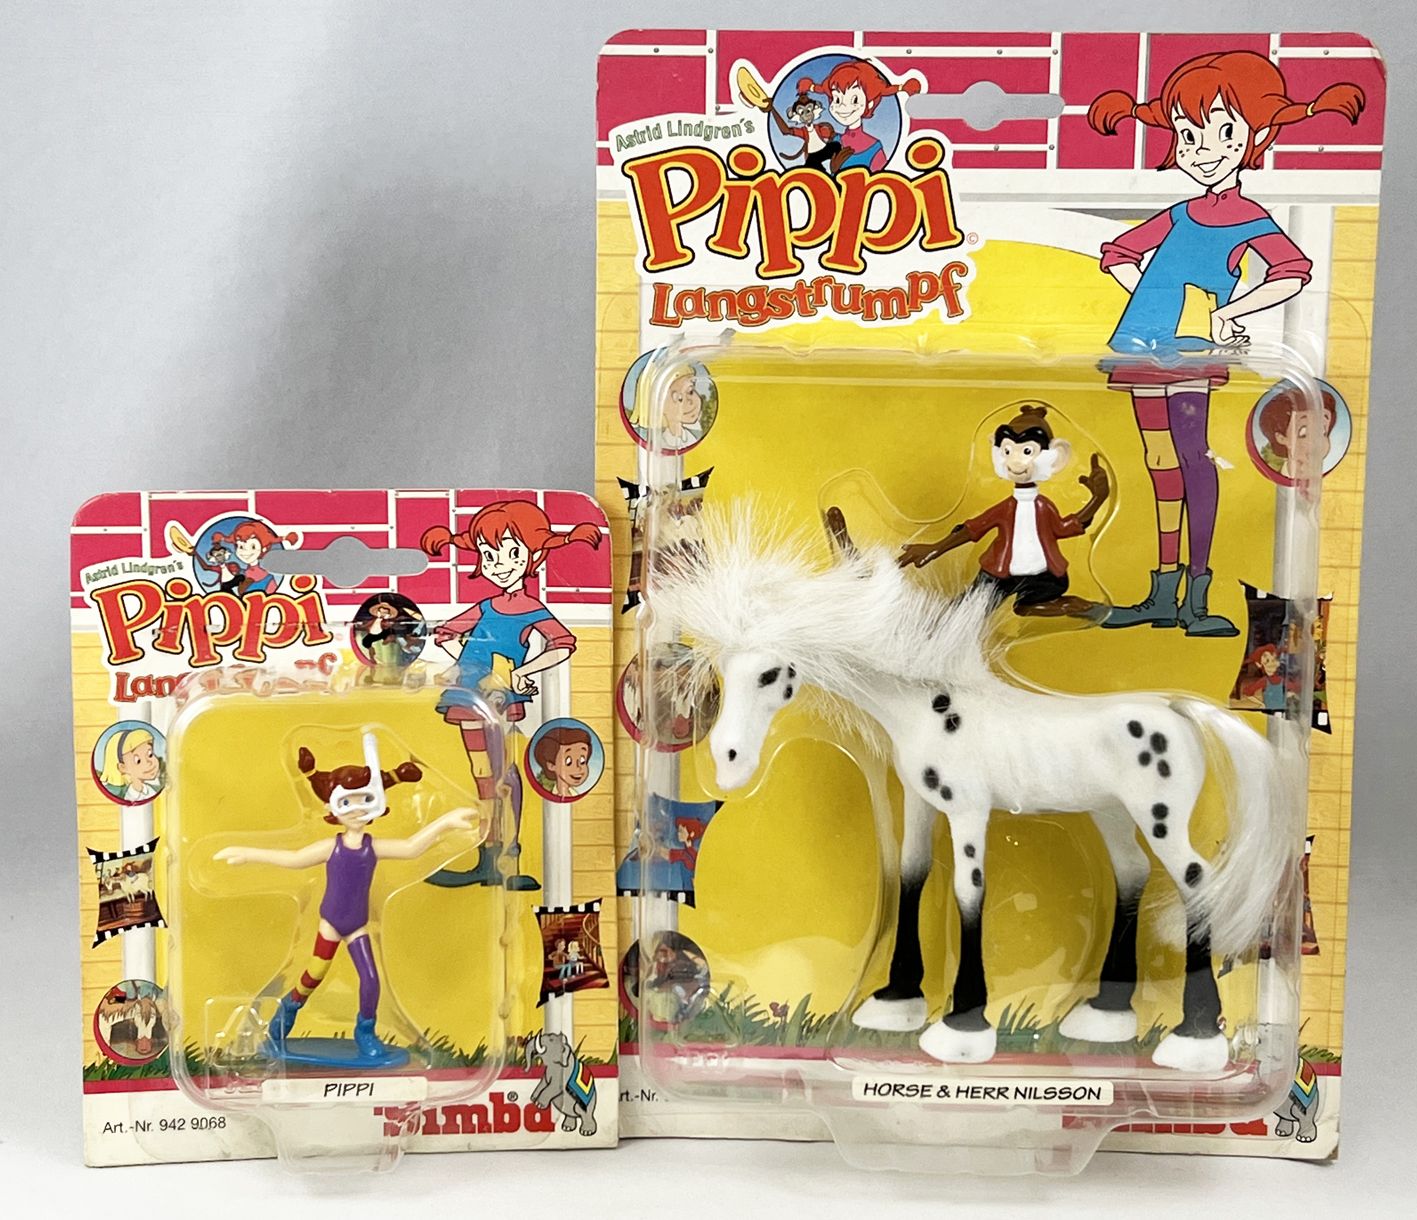 Modderig heel Invloedrijk Pipi Langstrumpf - Simba Toys PVC figure - Pipi (in beach outfit), Herr  Nilsson and Horse